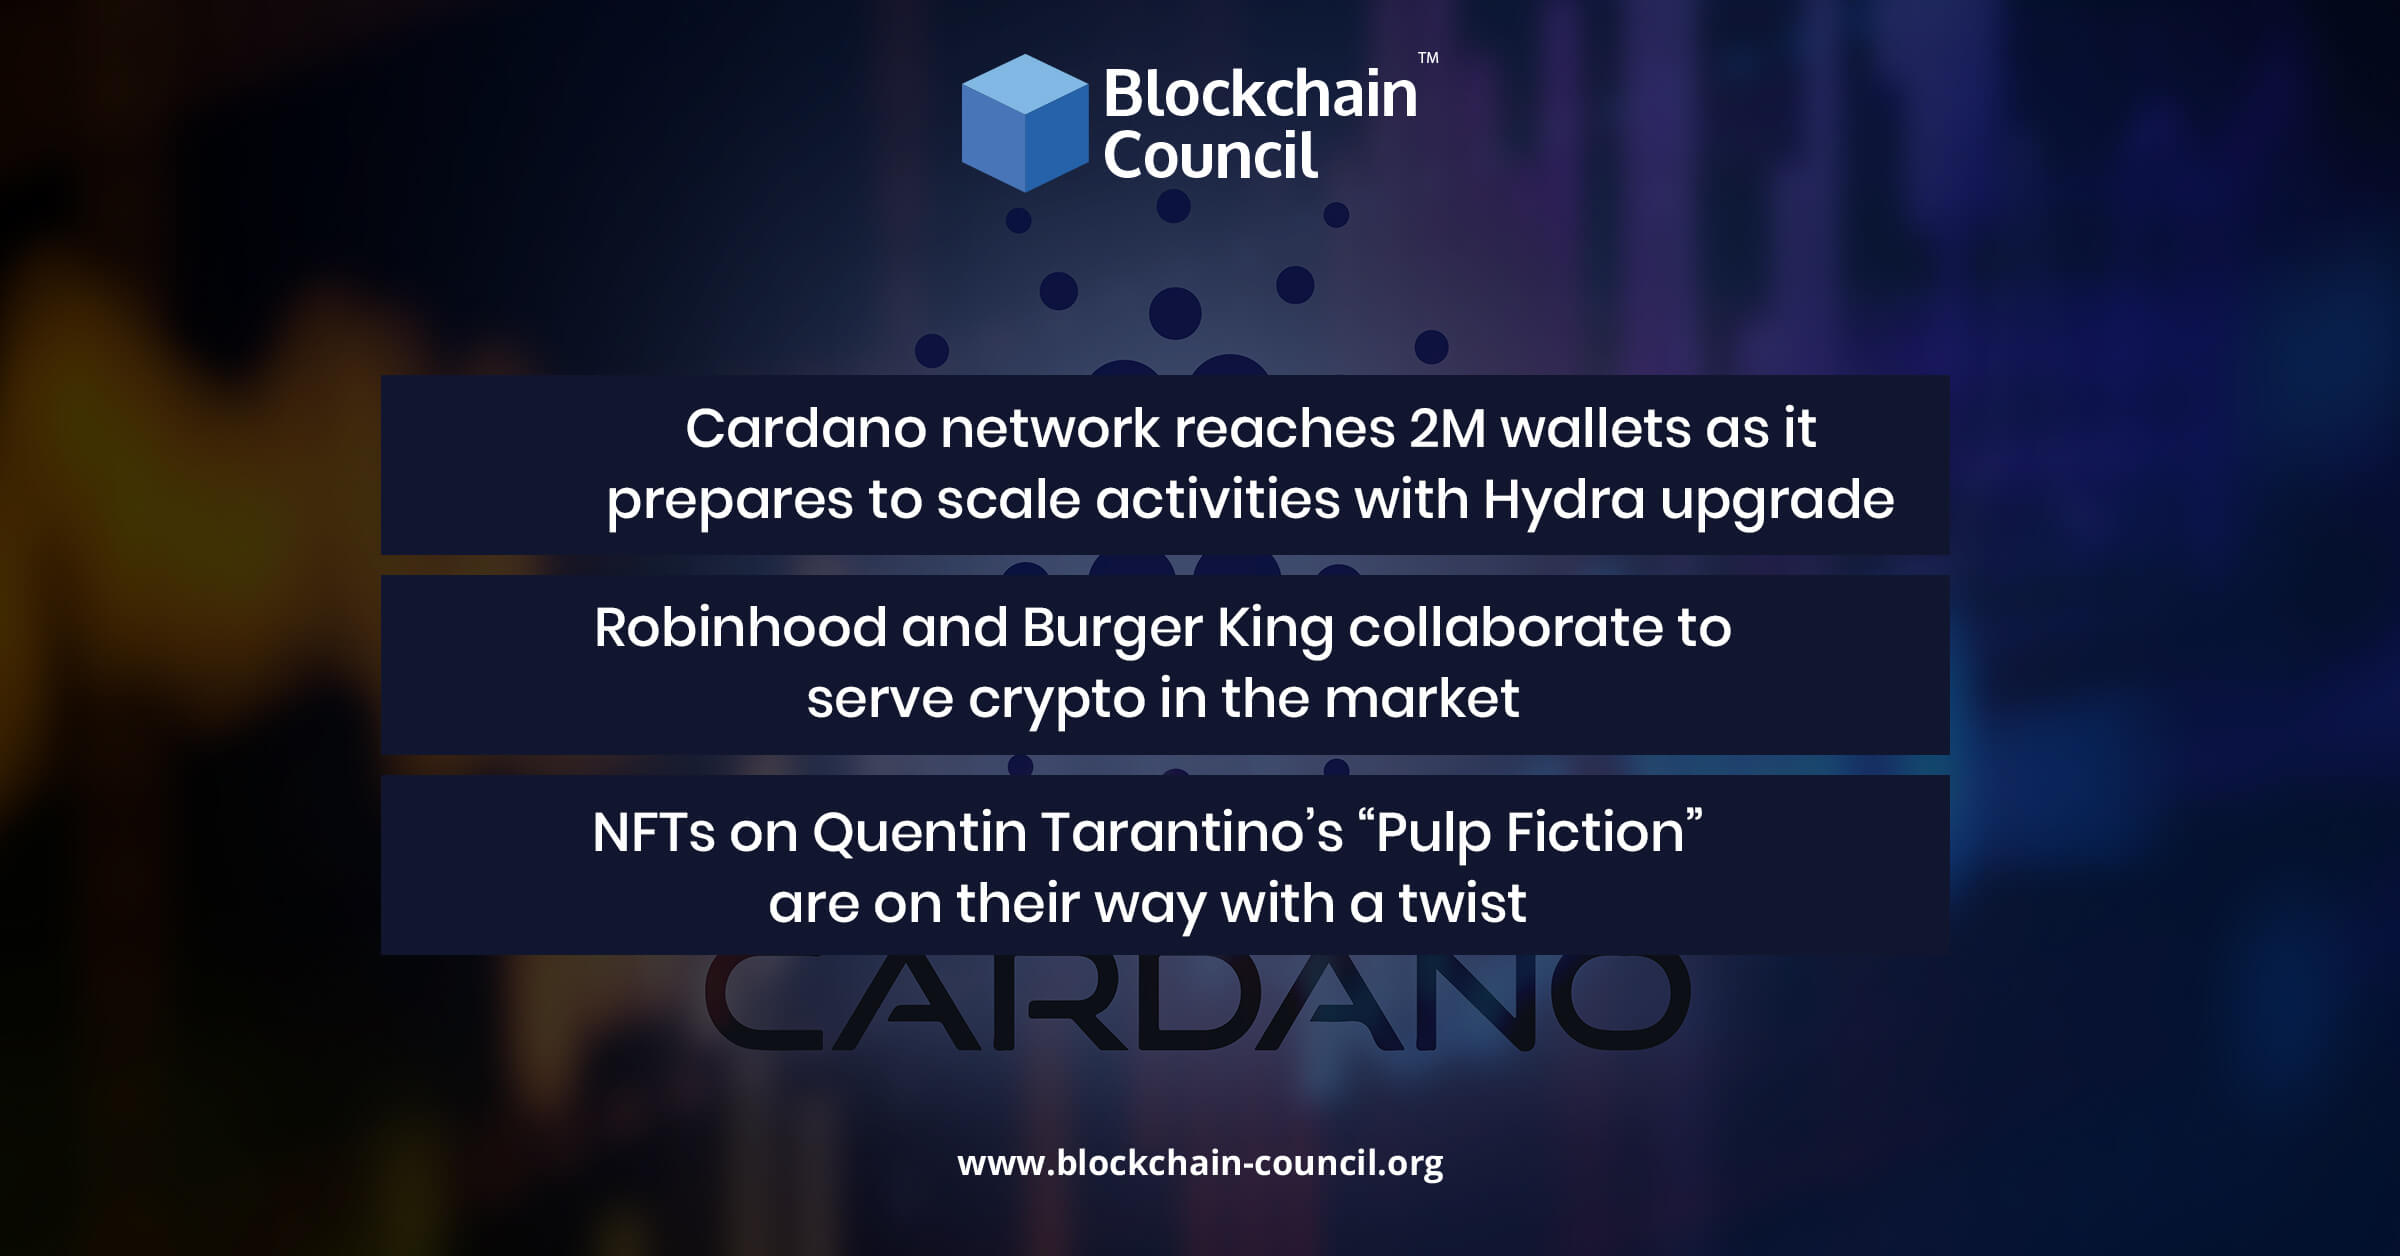 Cardano network reaches 2M wallets as it prepares to scale activities with Hydra upgrade (2)